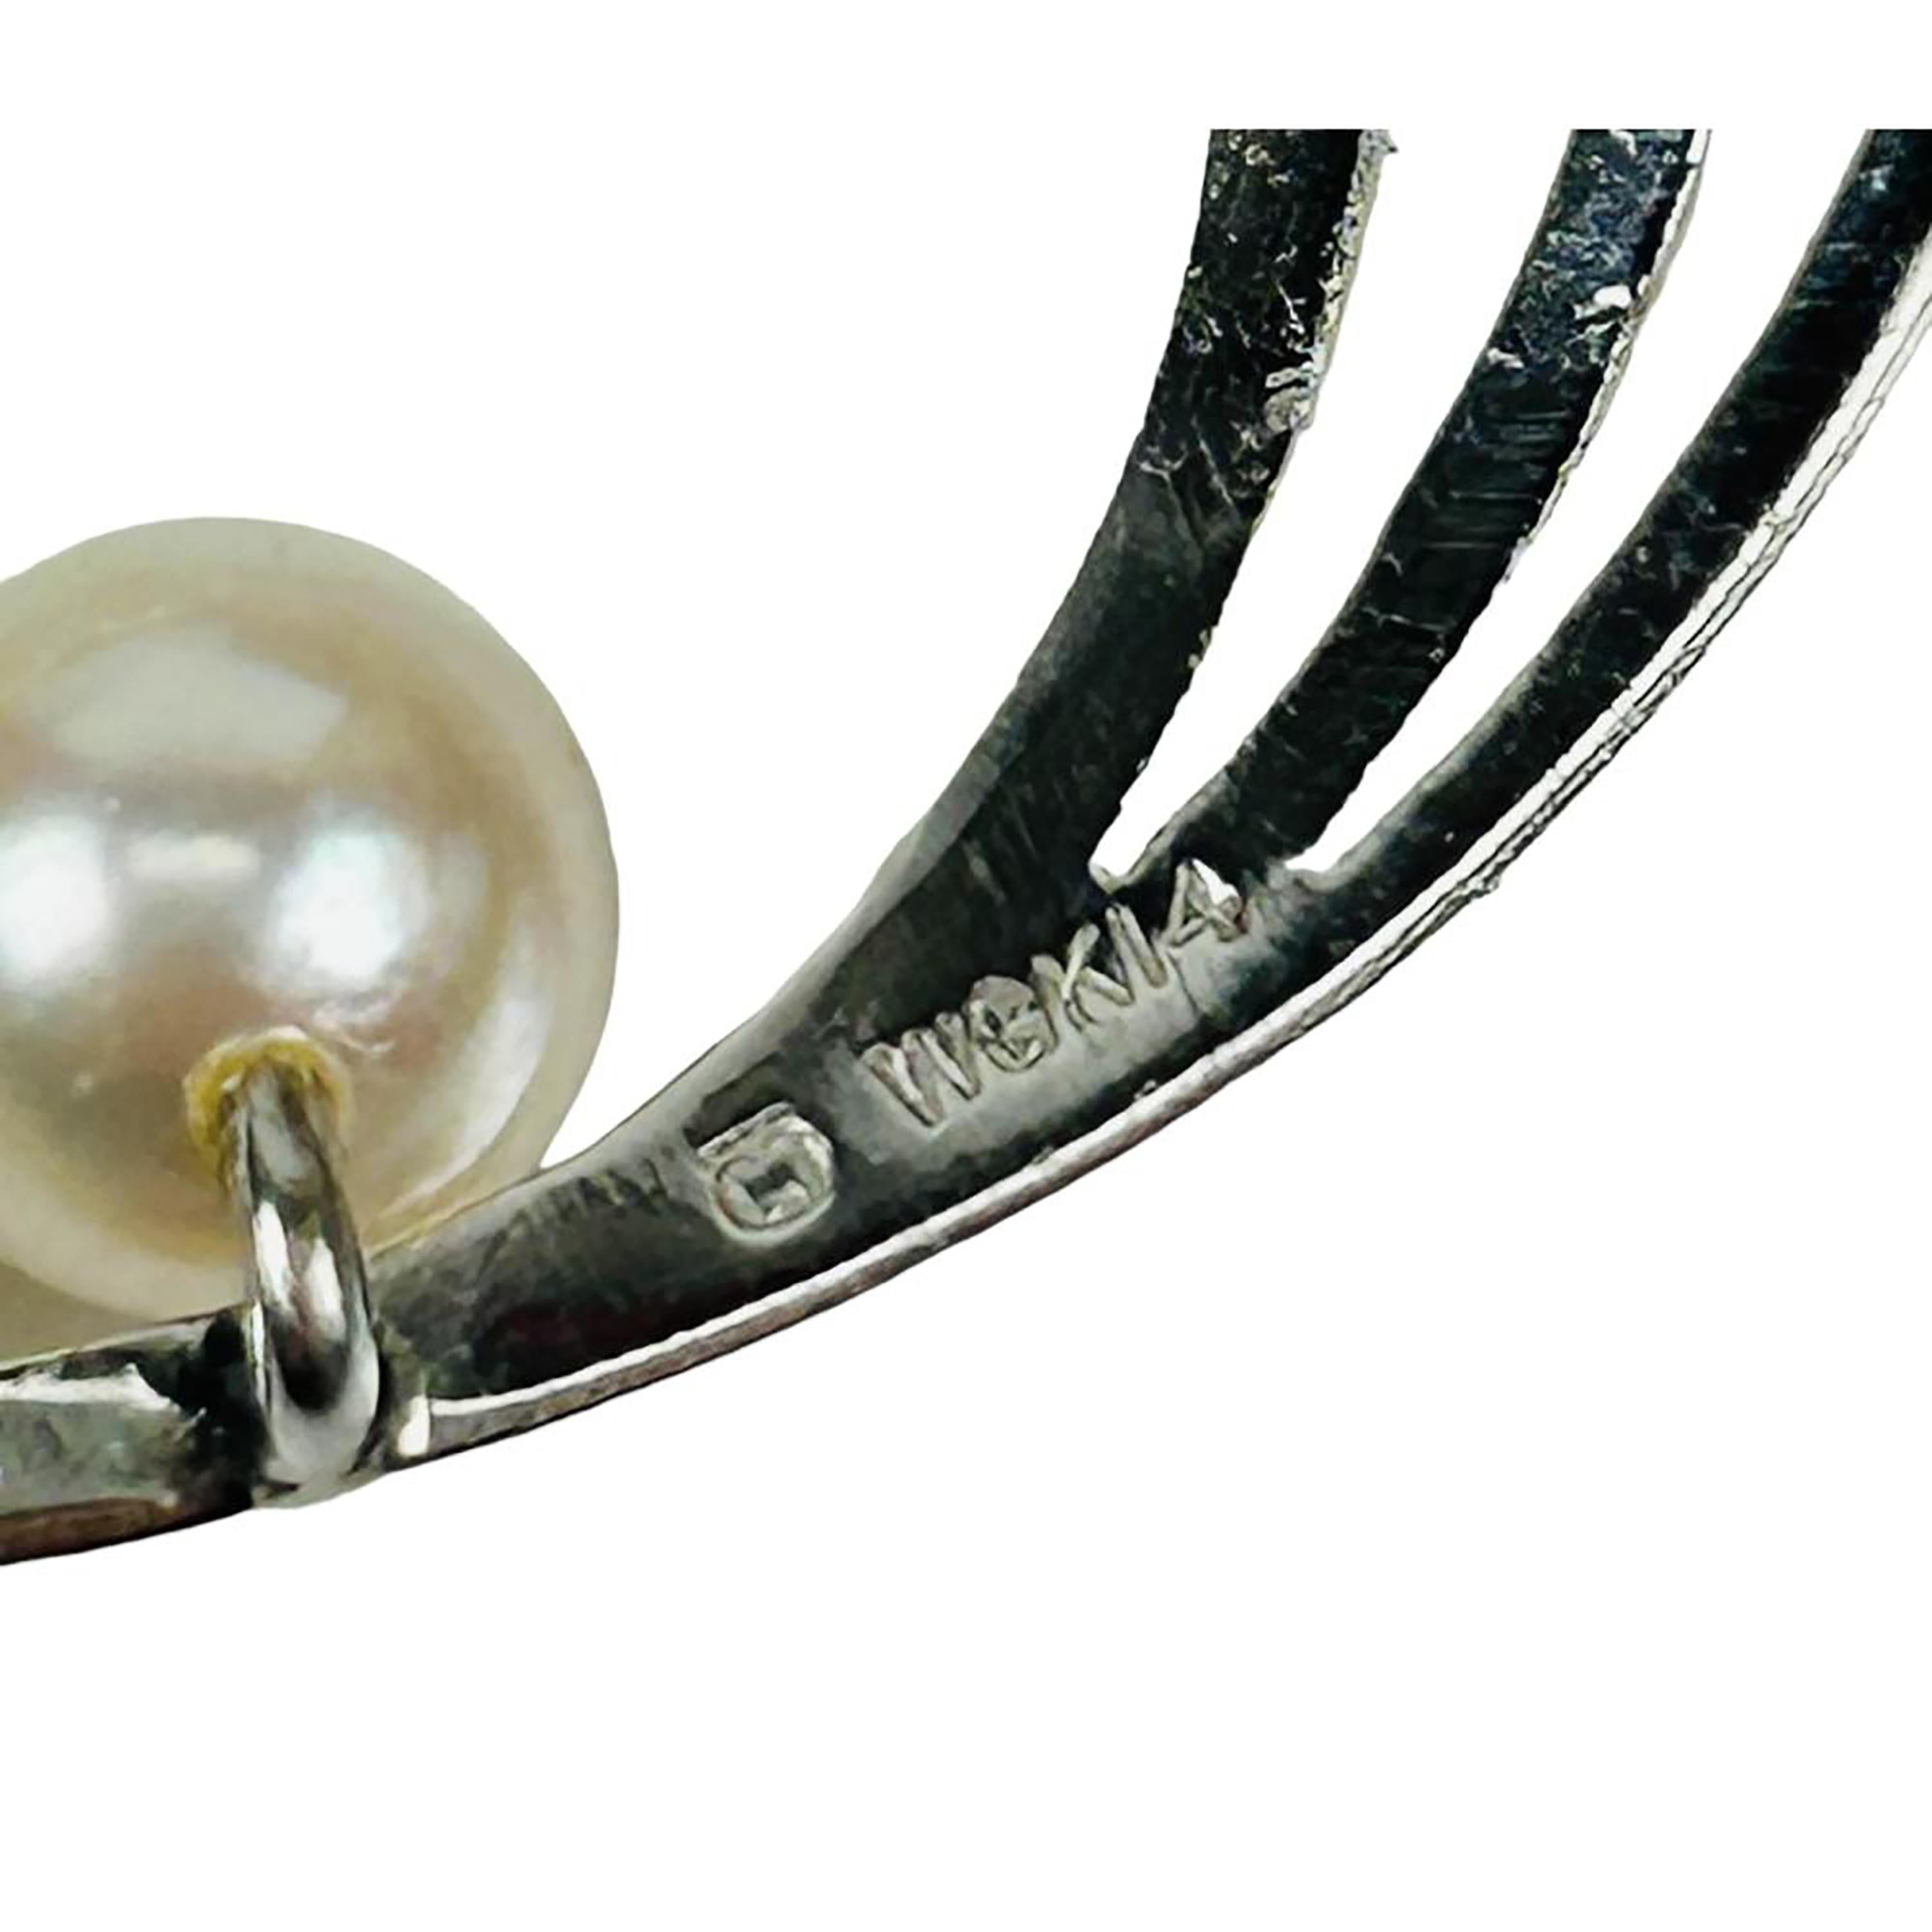 Introducing the Vintage Mikimoto Six Saltwater Akoya Pearl 14K White Gold 1.5 Inch Brooch:
Elevate your style with this exquisite Vintage Mikimoto Brooch, a timeless piece of jewelry that exudes elegance and sophistication. Crafted from high-quality